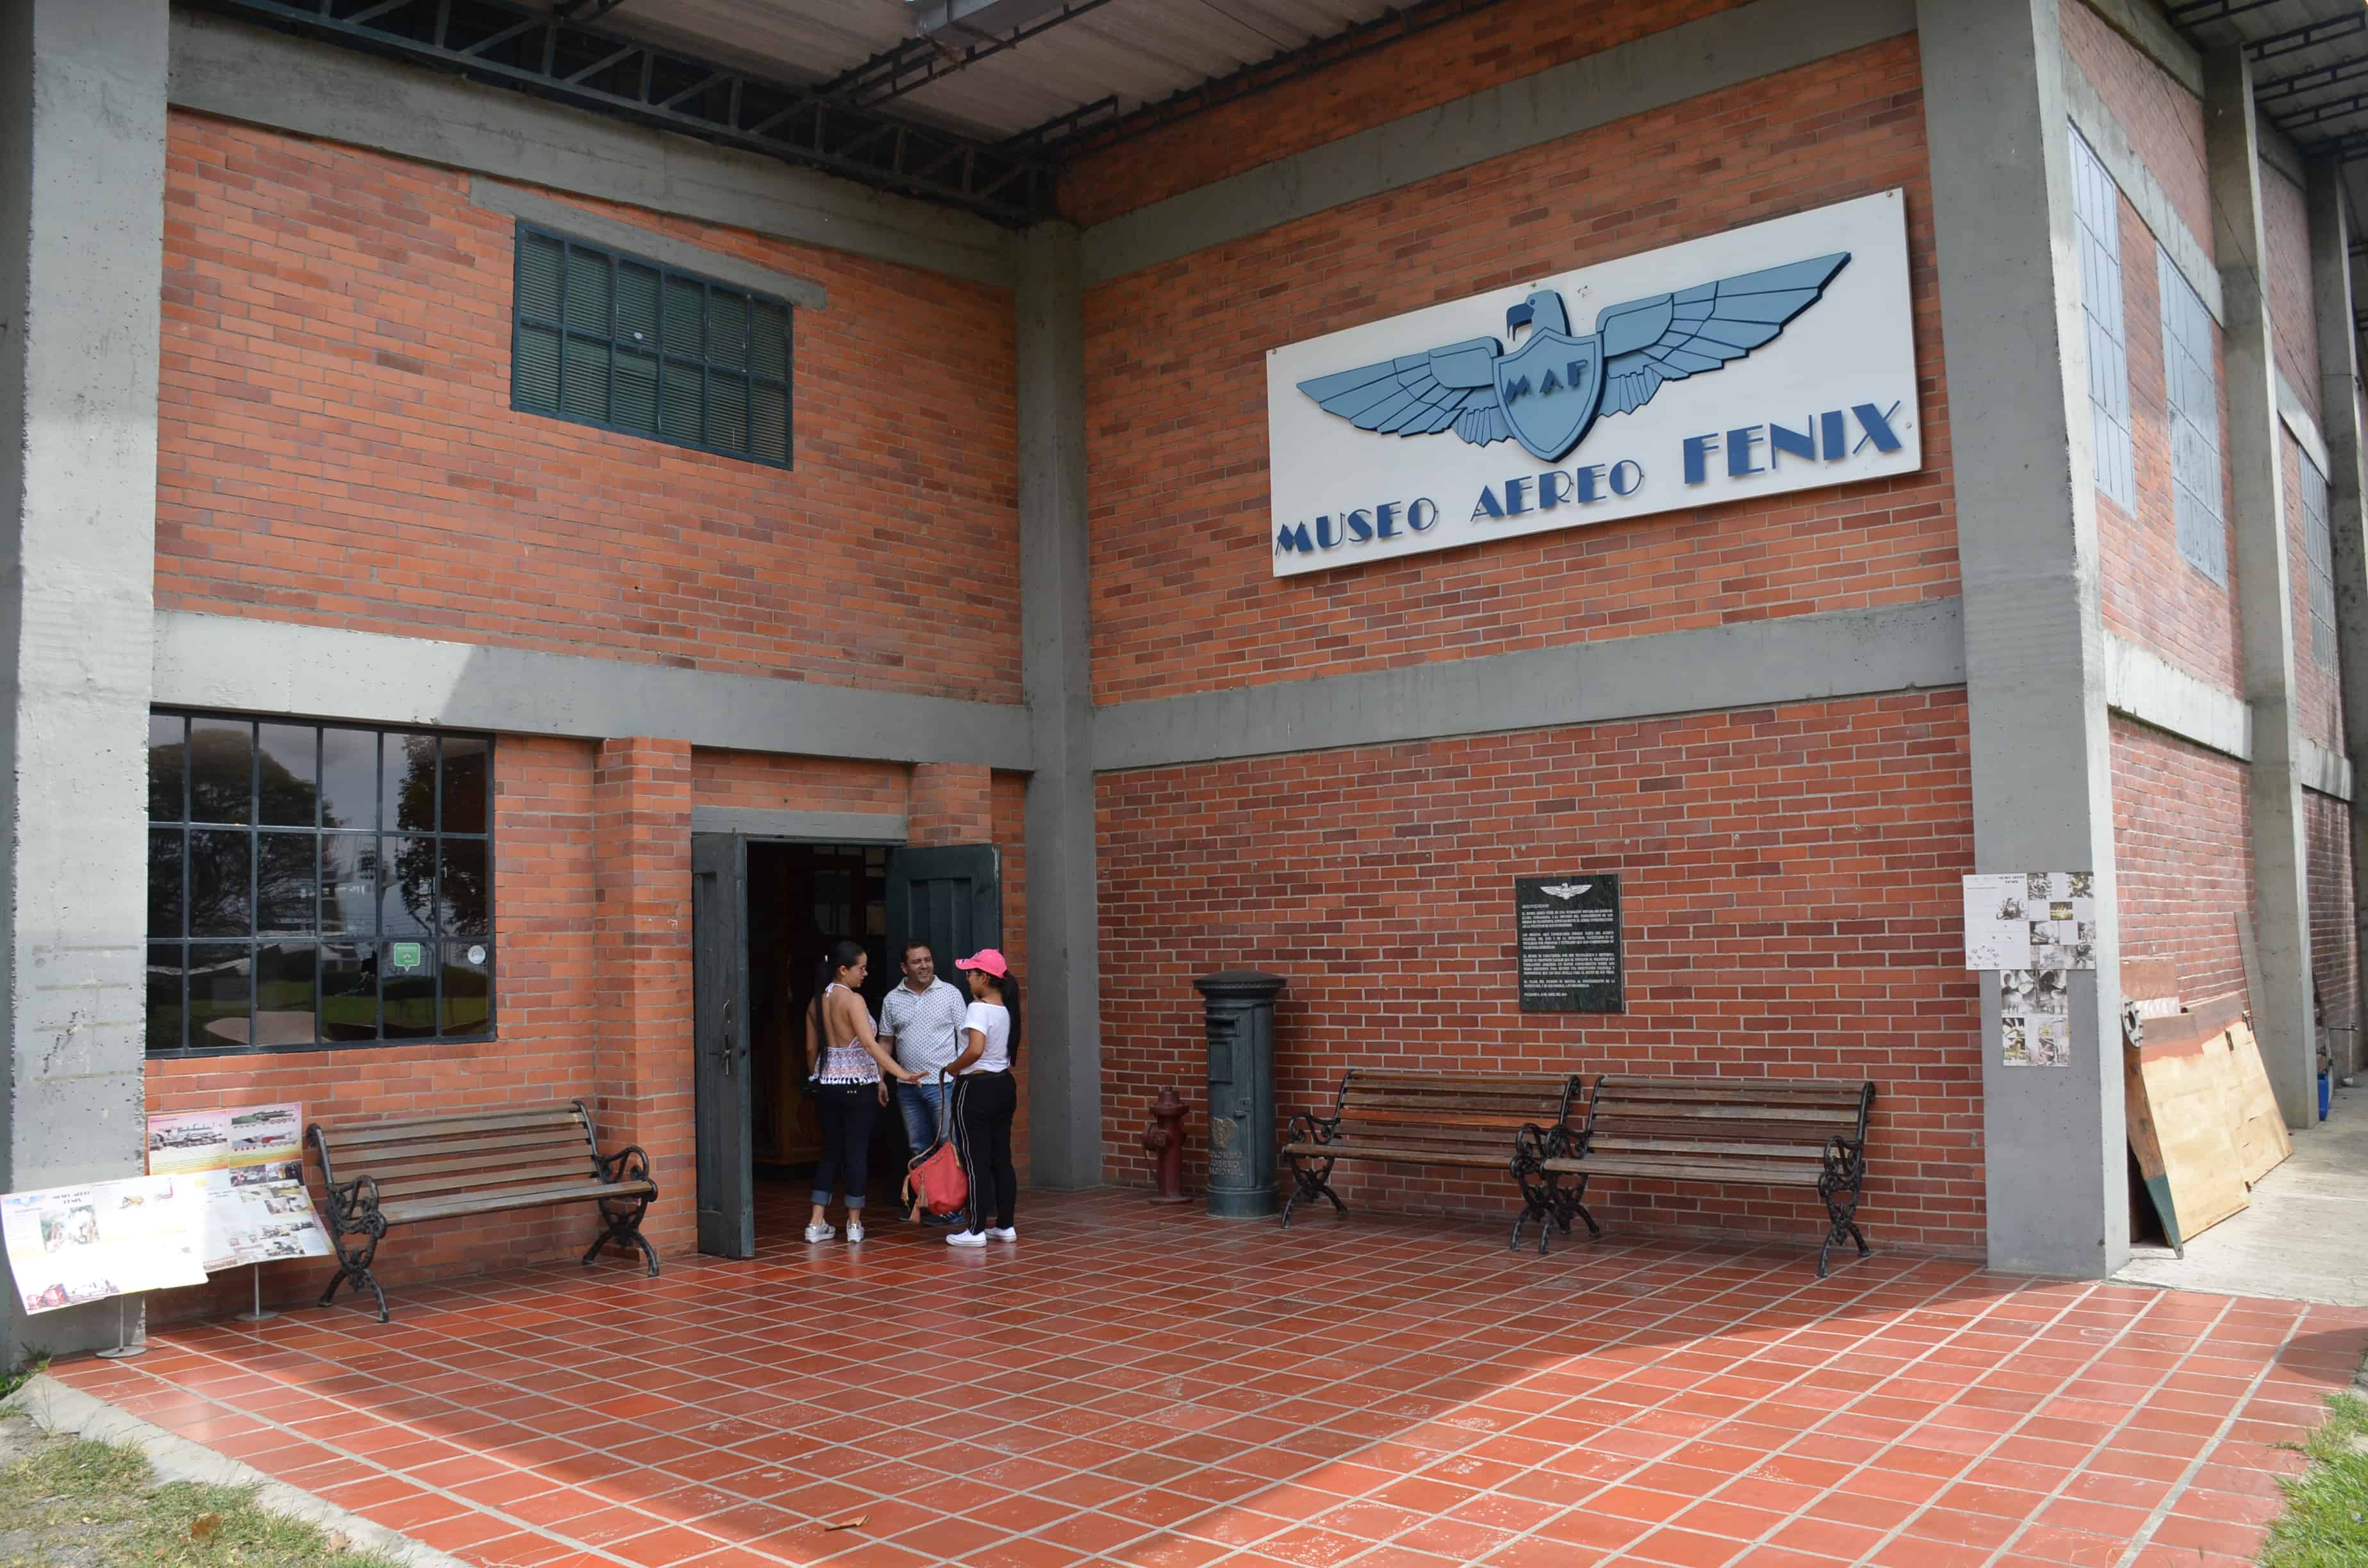 Entrance to the Fénix Air Museum in Palmira, Valle del Cauca, Colombia